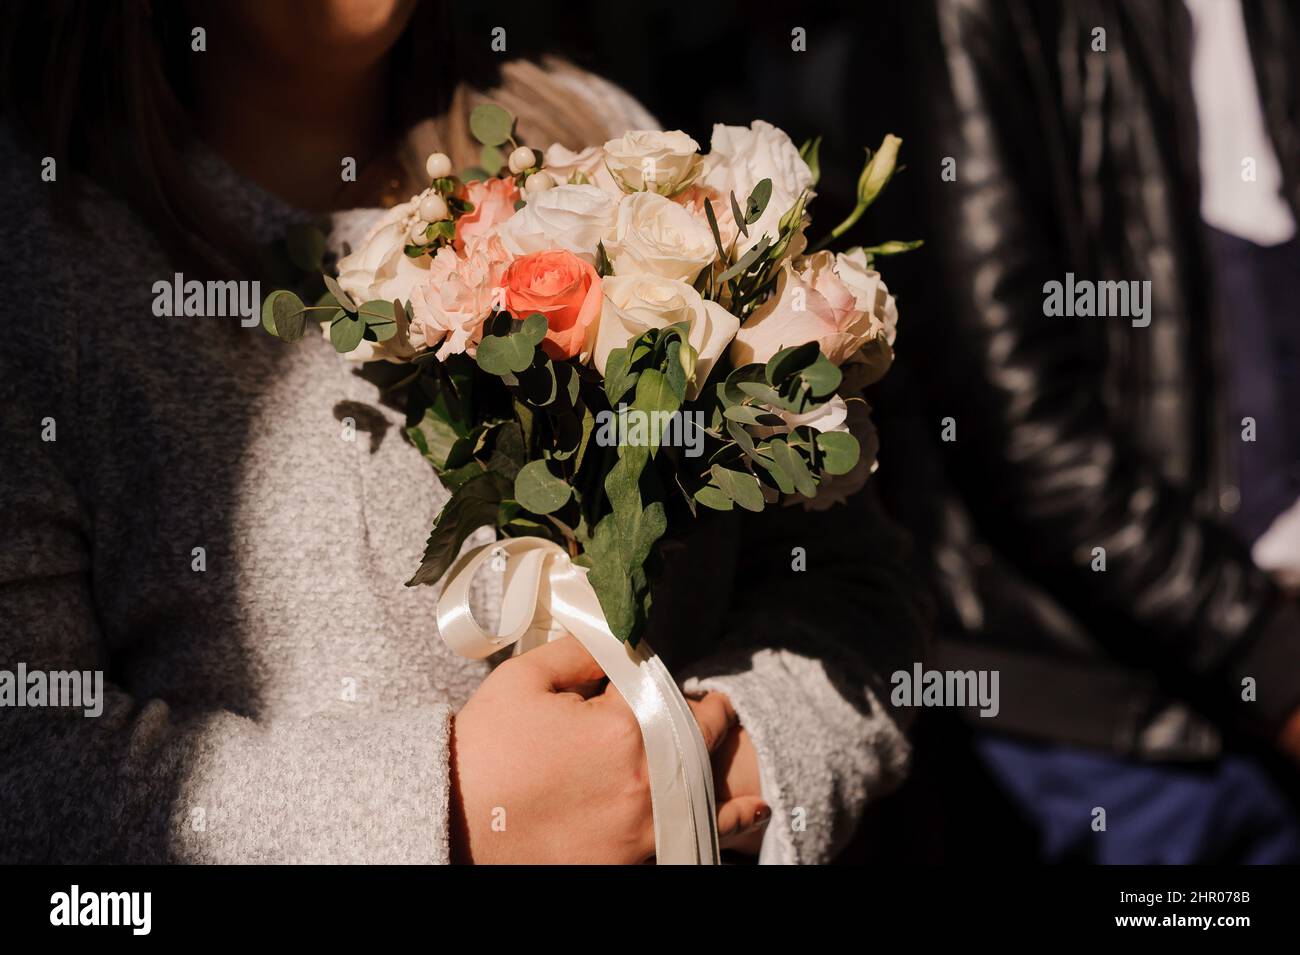 Bouquet of flowers in the bride's hand. Bridal bouquet Stock Photo